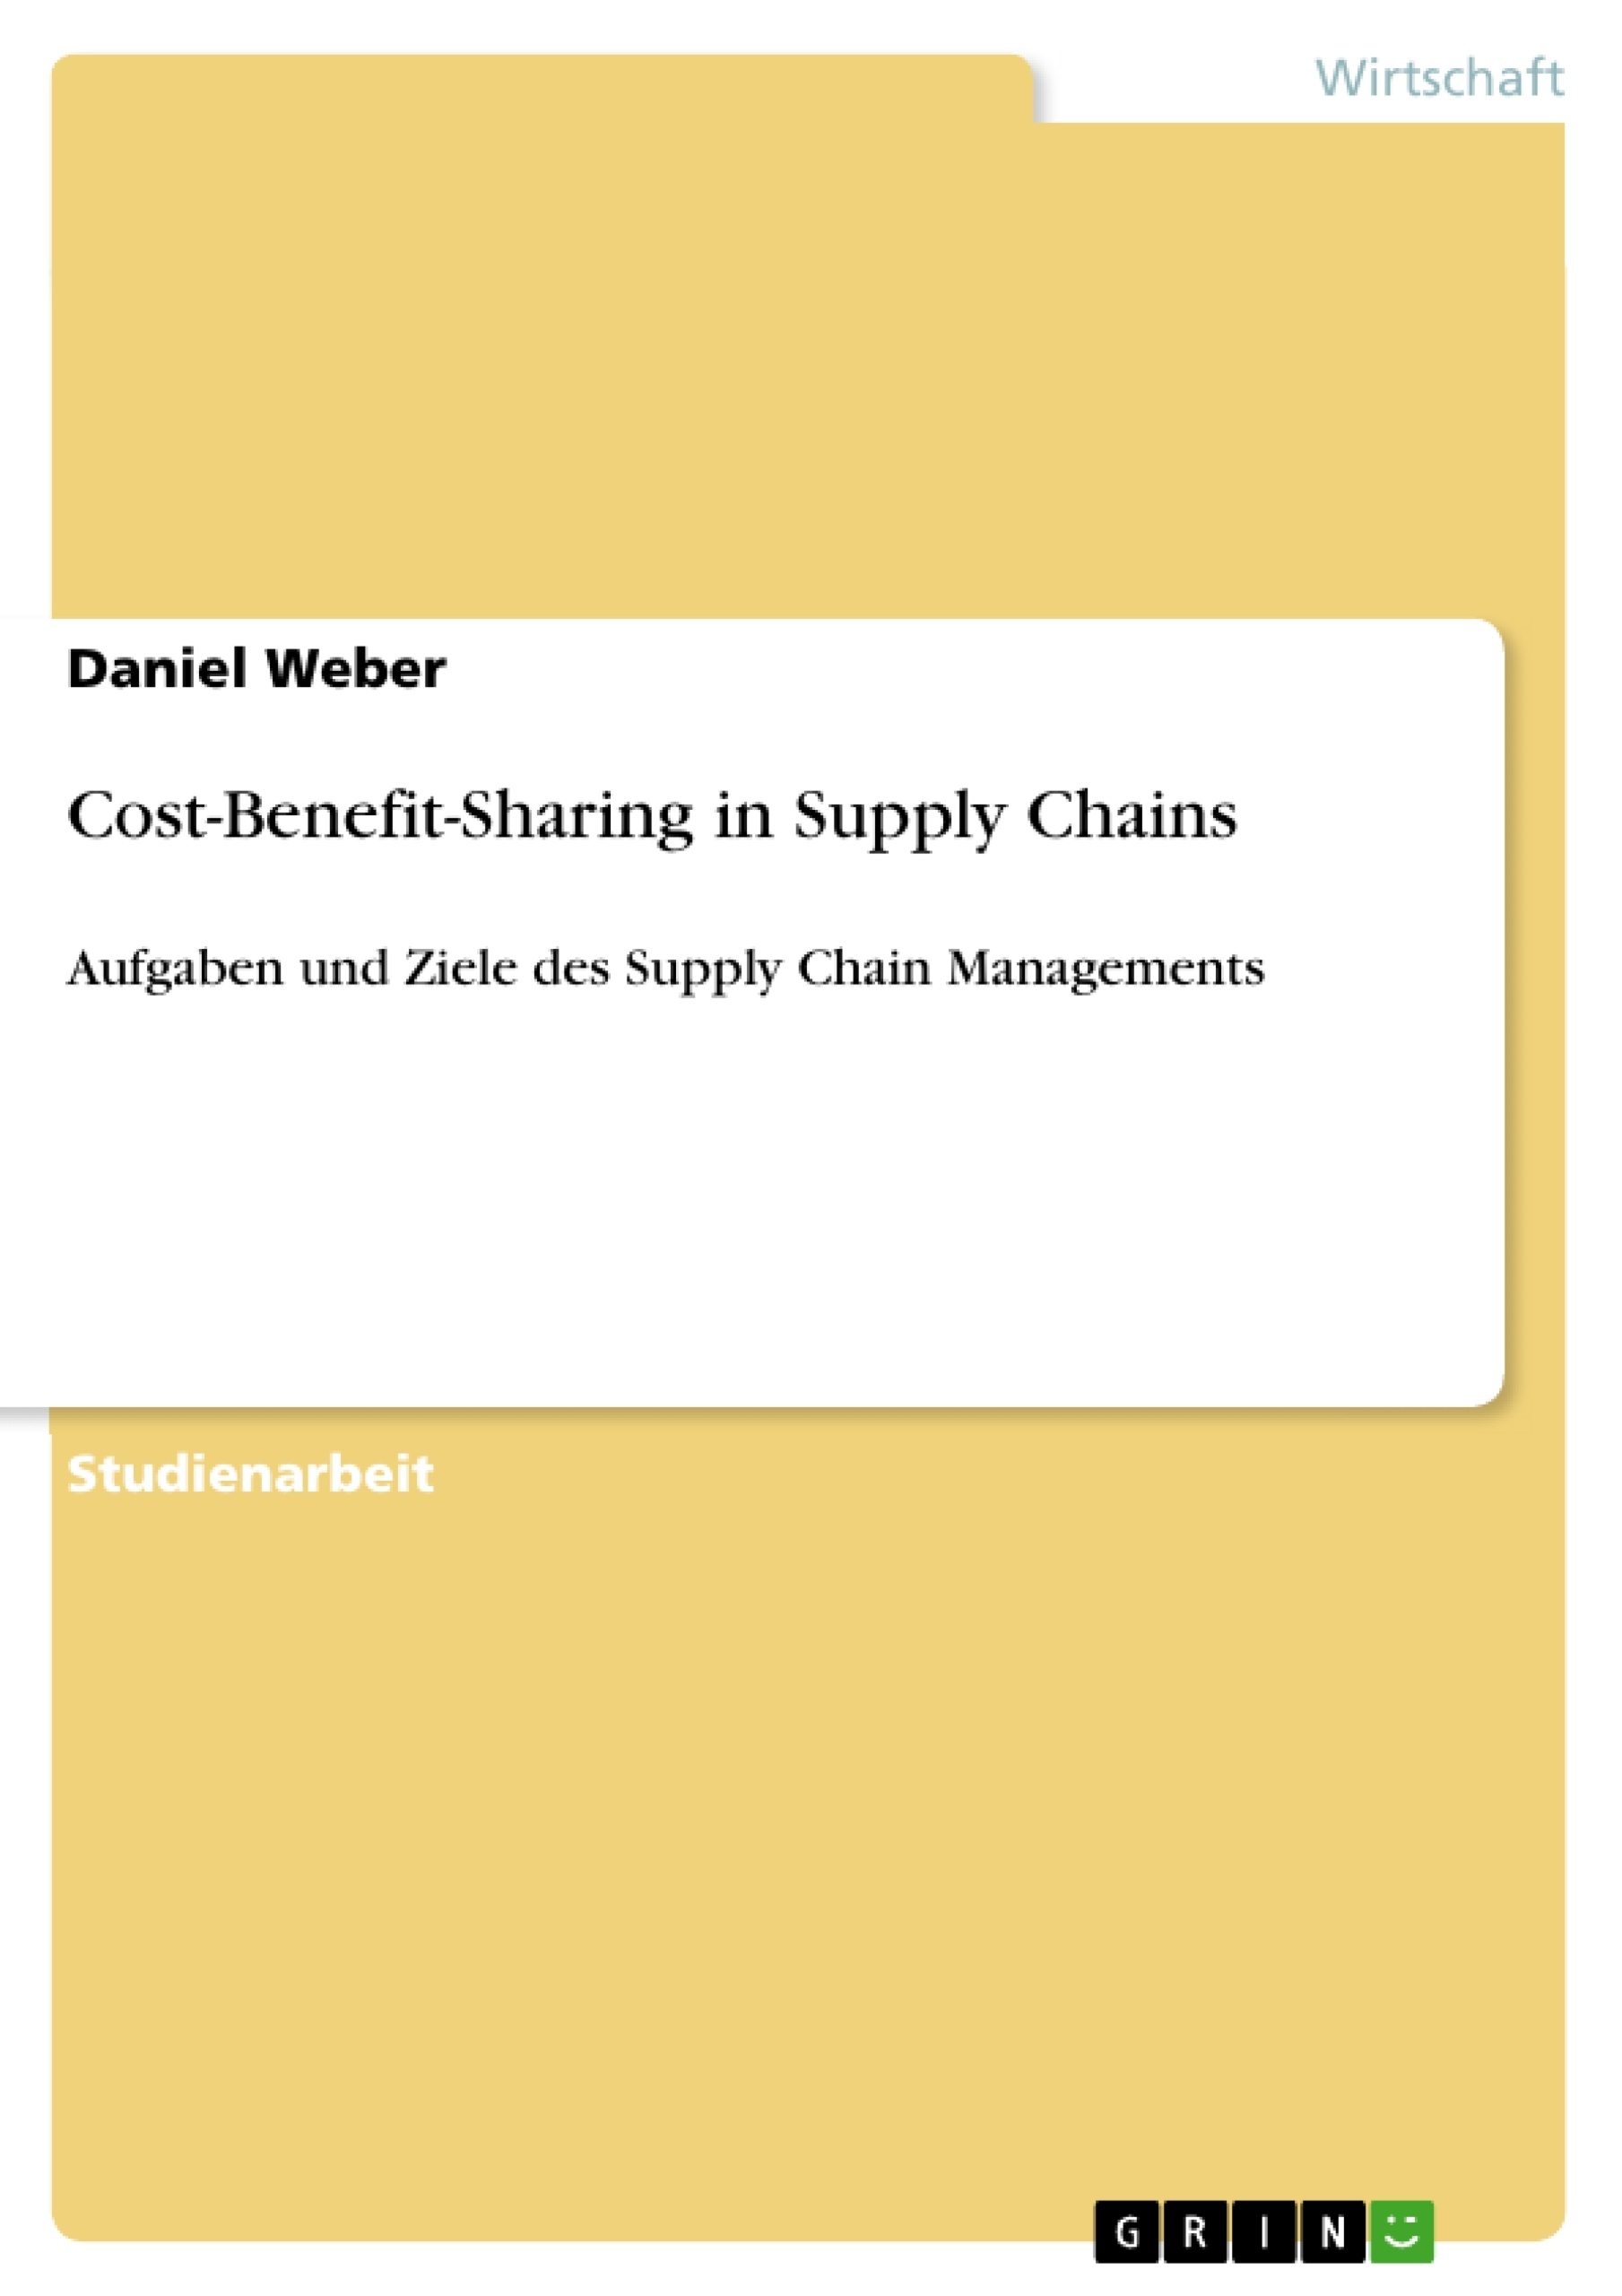 Título: Cost-Benefit-Sharing in Supply Chains